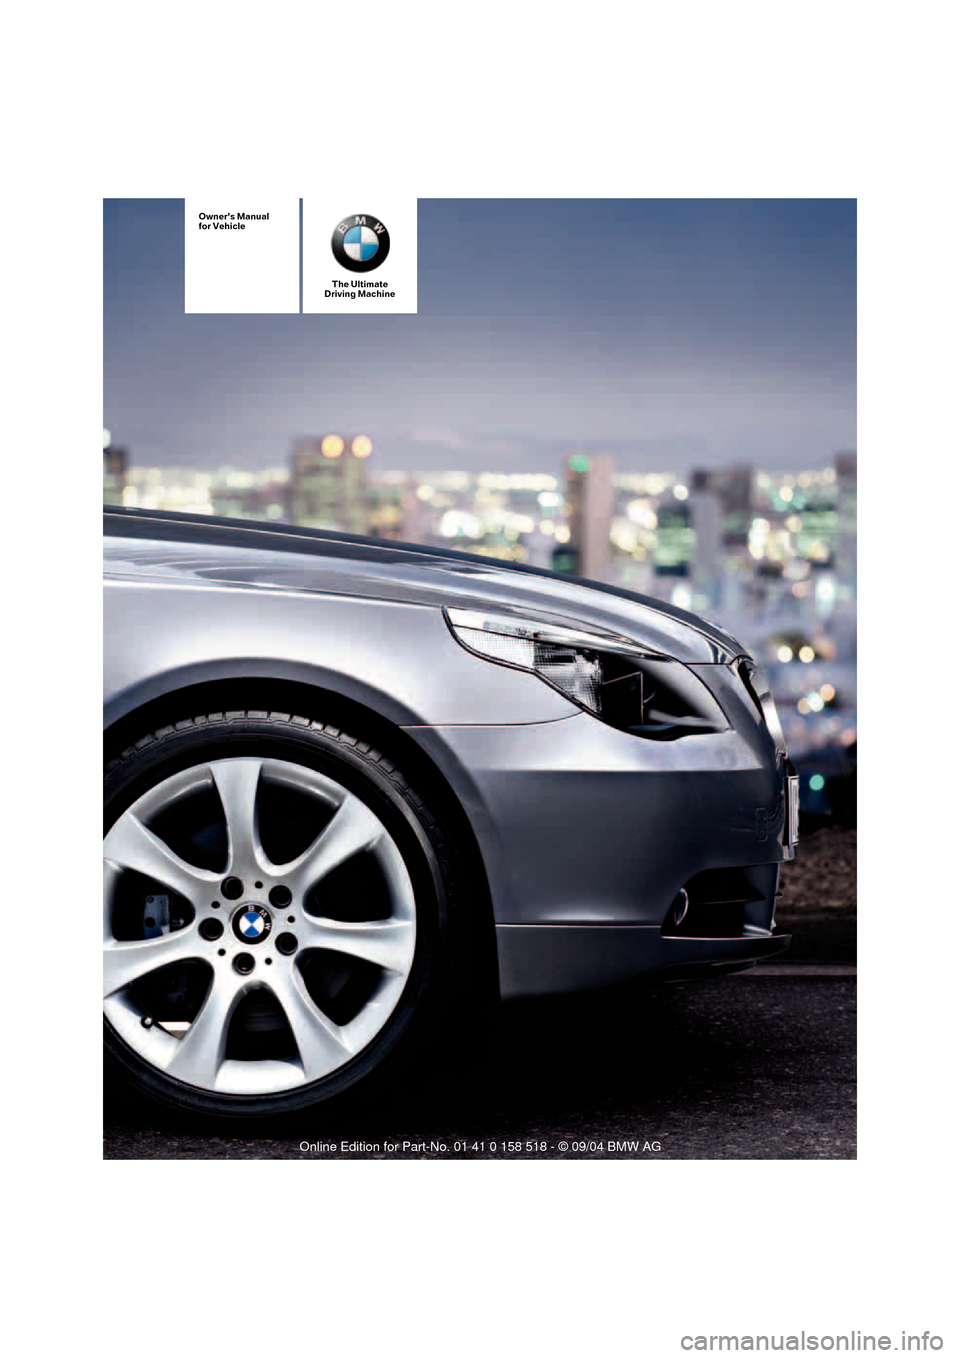 BMW 545I SEDAN 2005 E60 Owners Manual The Ultimate
Driving Machine
Owners Manual
for Vehicle 